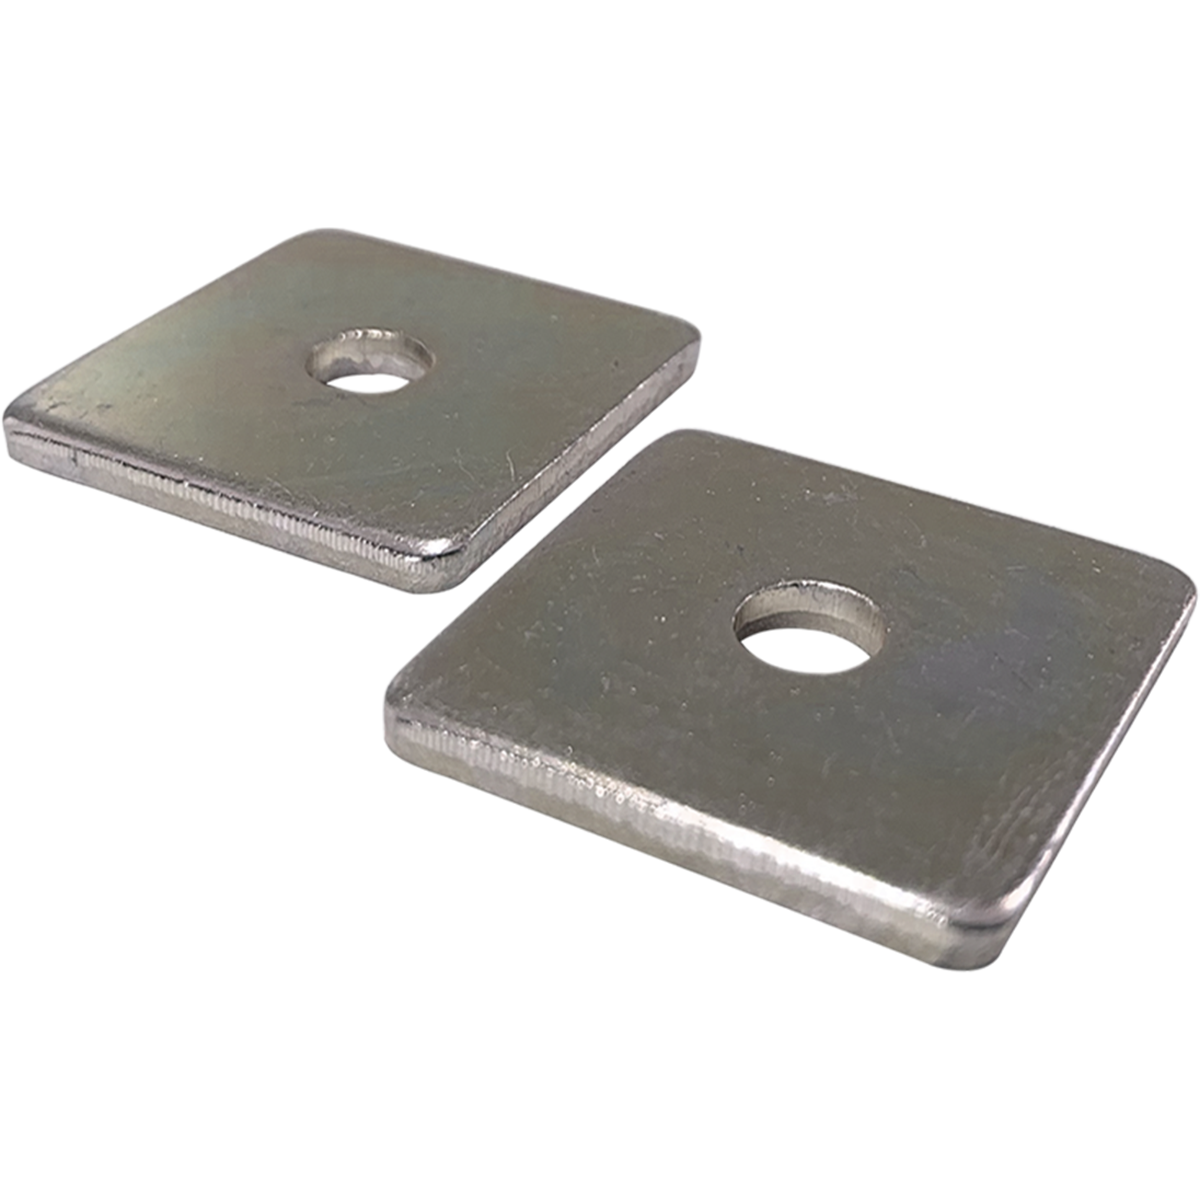 Square Plate Washers are available in a selection of materials and diameters